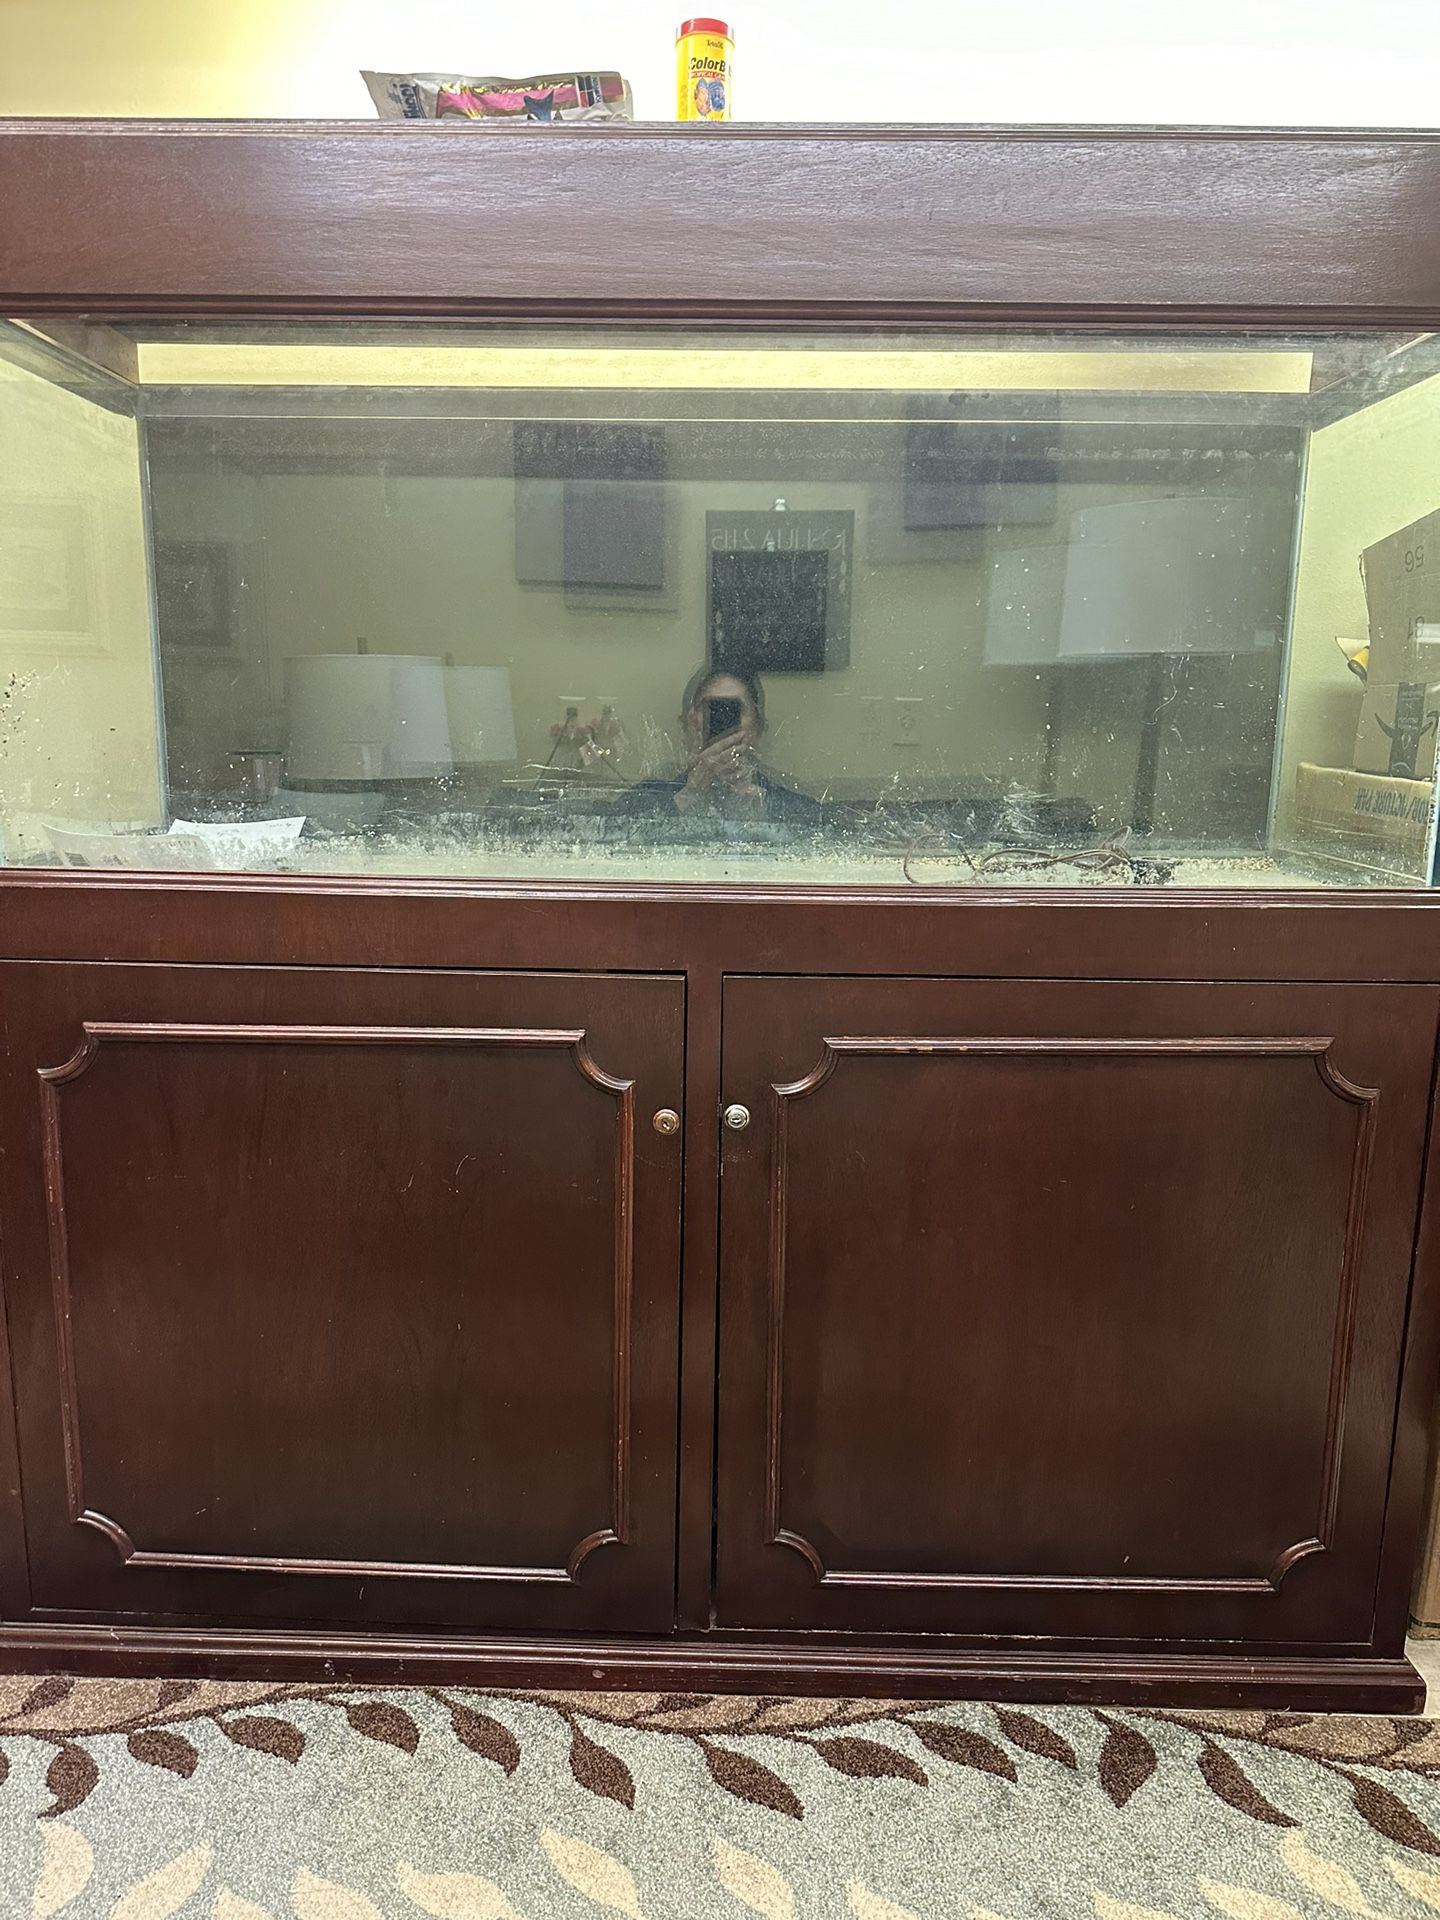 Price Drop To $250. Fish Tank Ignore The mark Sold Notice. Still Selling